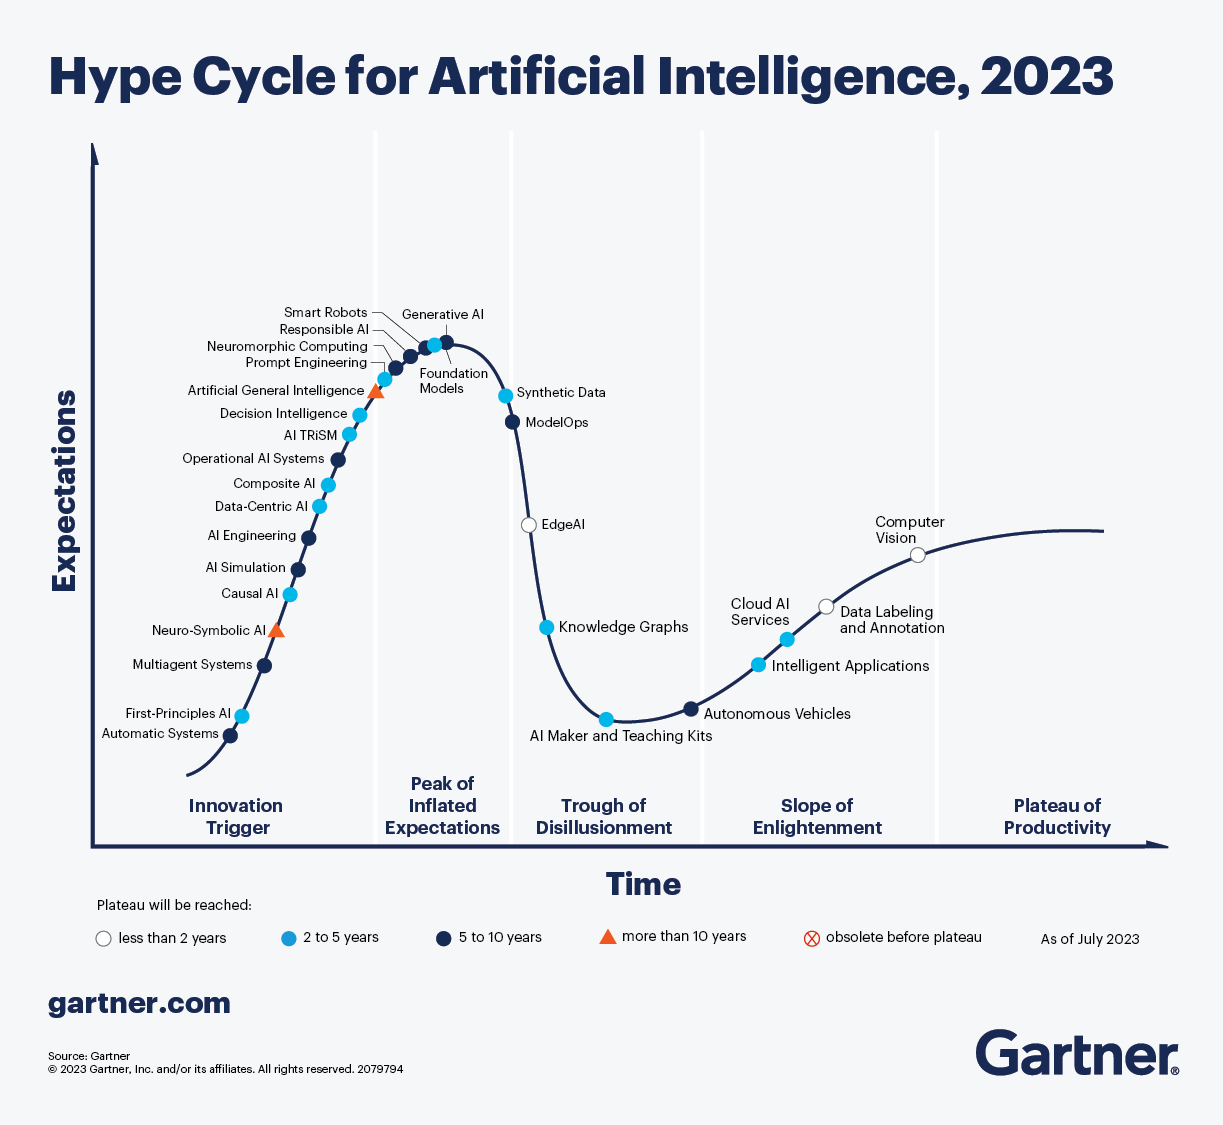 https://25048352.fs1.hubspotusercontent-eu1.net/hubfs/25048352/Imported_Blog_Media/hype-cycle-for-artificial-intelligence-2023-Apr-03-2024-06-17-29-5561-PM.png